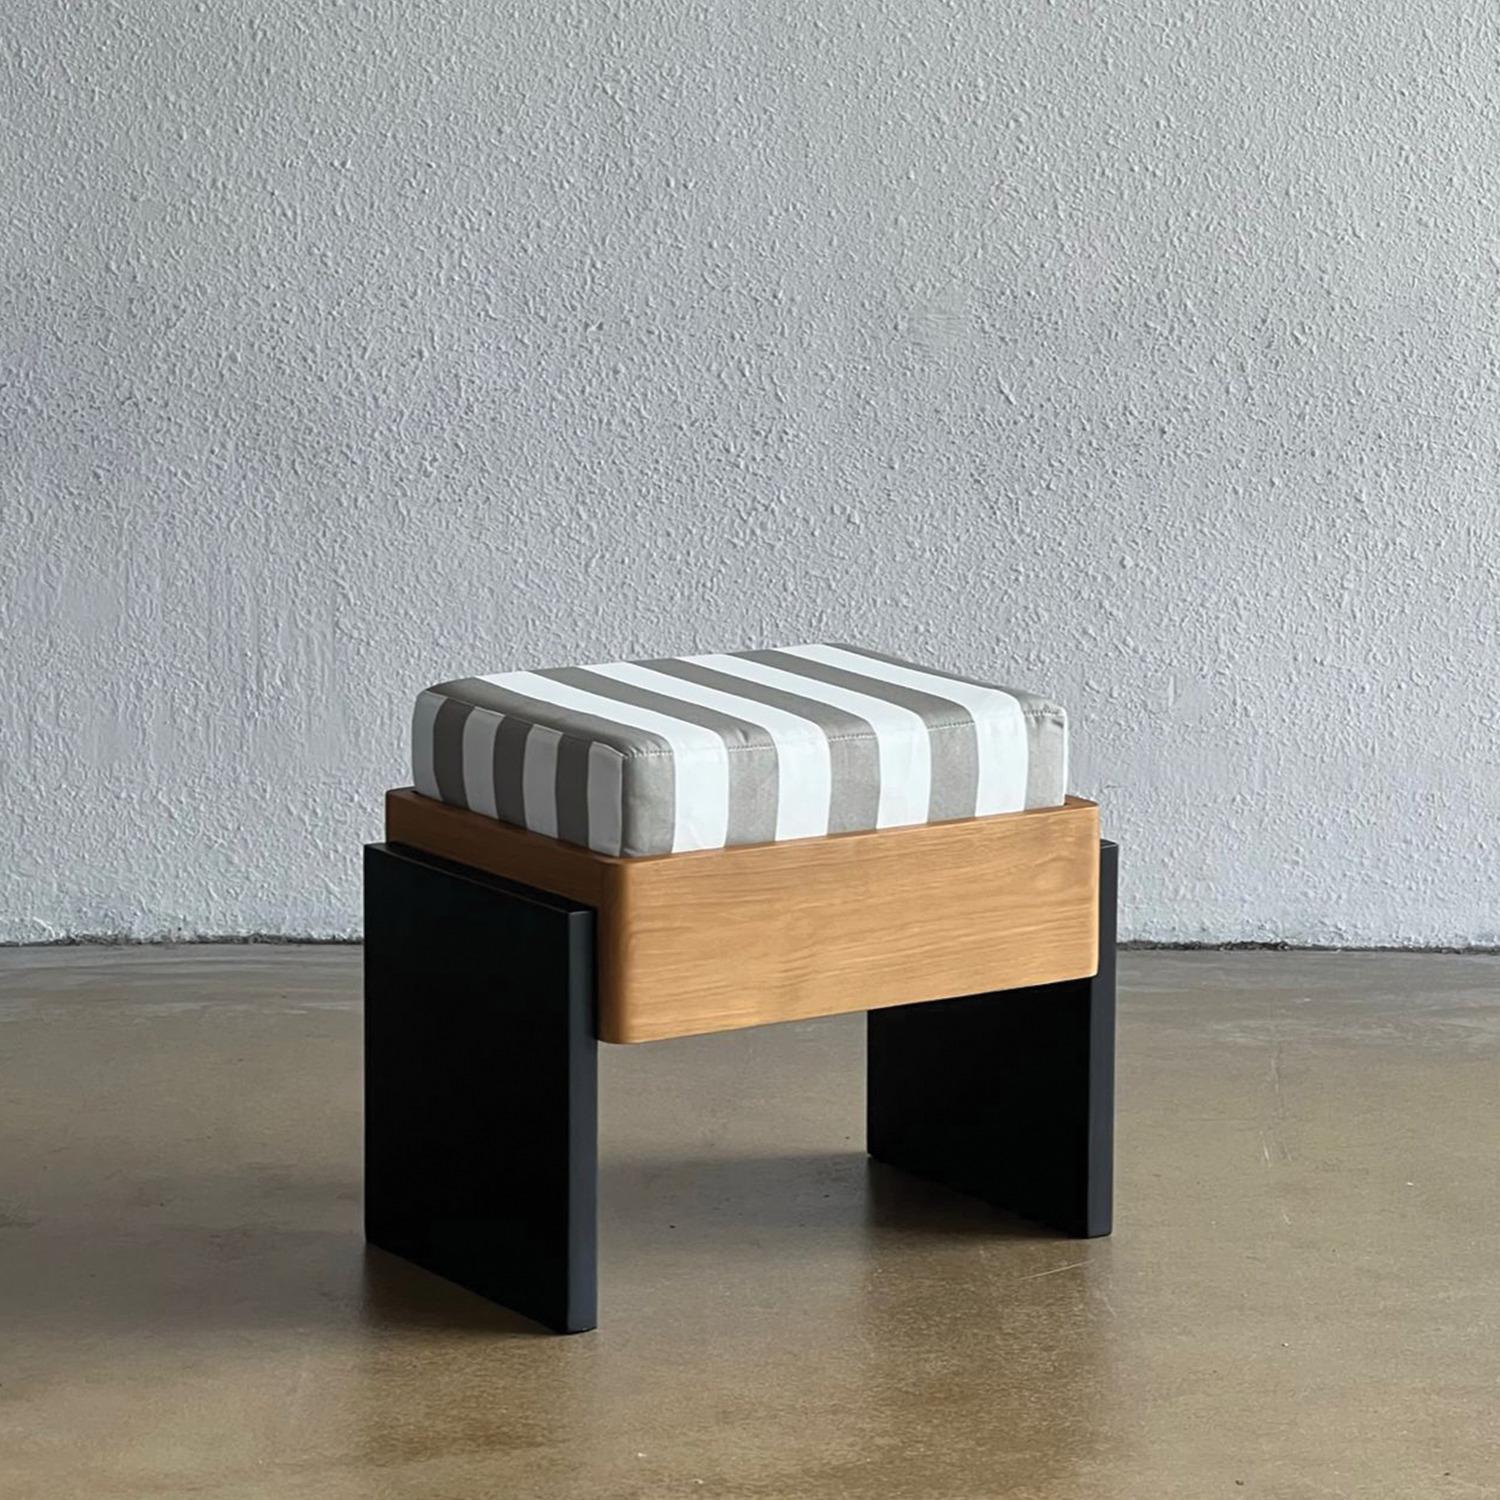 Striped Ottoman by Studio Kallang
Dimensions: W 56 x D 40 x H 47 cm
Materials: Solid Teak, Upholstered Cushion. 
Finish: Natural, Matte Black, Striped Fabric.

STUDIO KALLANG IS A SINGAPORE AND SEATTLE BASED PROJECT FOCUSING ON OBJECTS DESIGNED BY